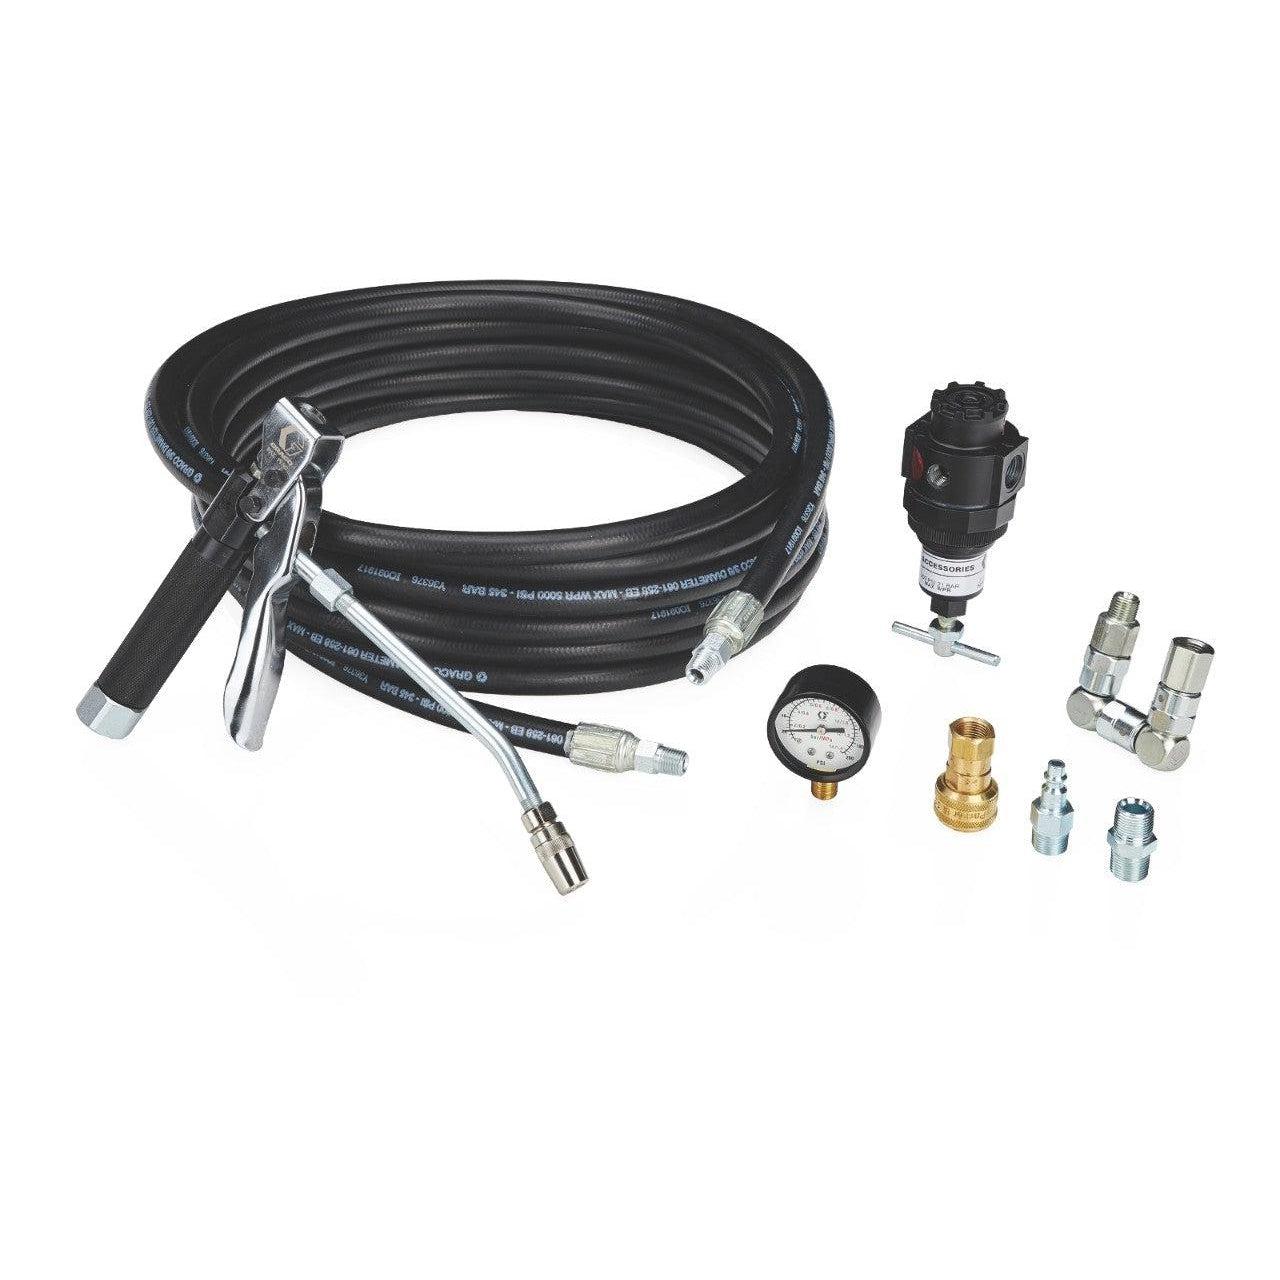 Dispense Kit for Fire-Ball¬Æ 300 15:1 Grease Pump Packages - 25 ft (7.6 m) Hose